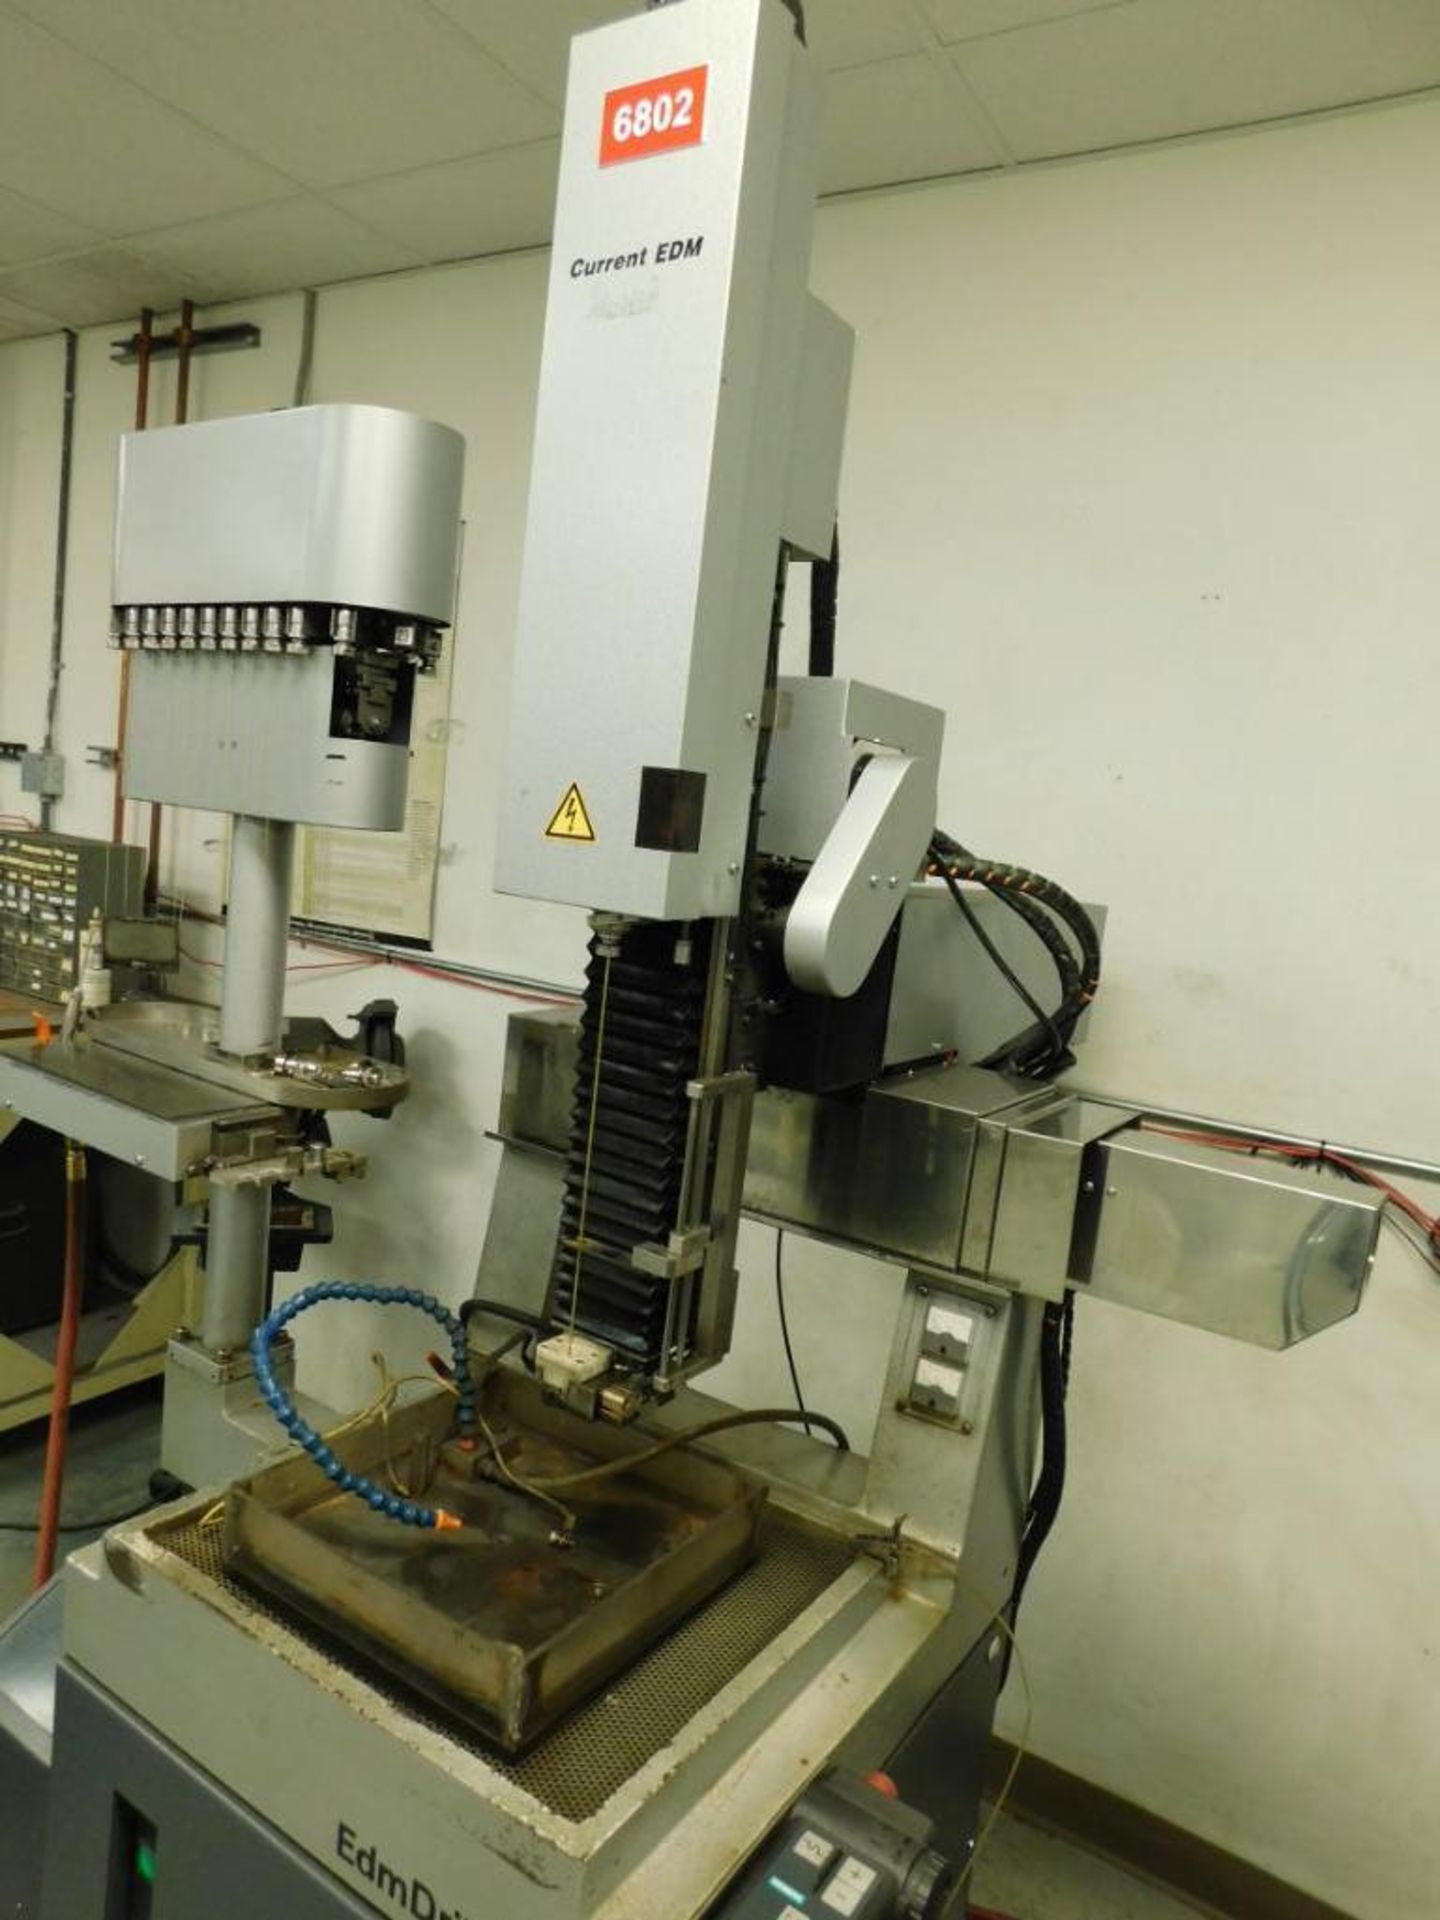 Current CNC Hole Drilling EDM Machine, Model CT300, S/N 84302 (2006), 12 in. X-Axis, 8 in. Y-Axis, 1 - Image 3 of 3